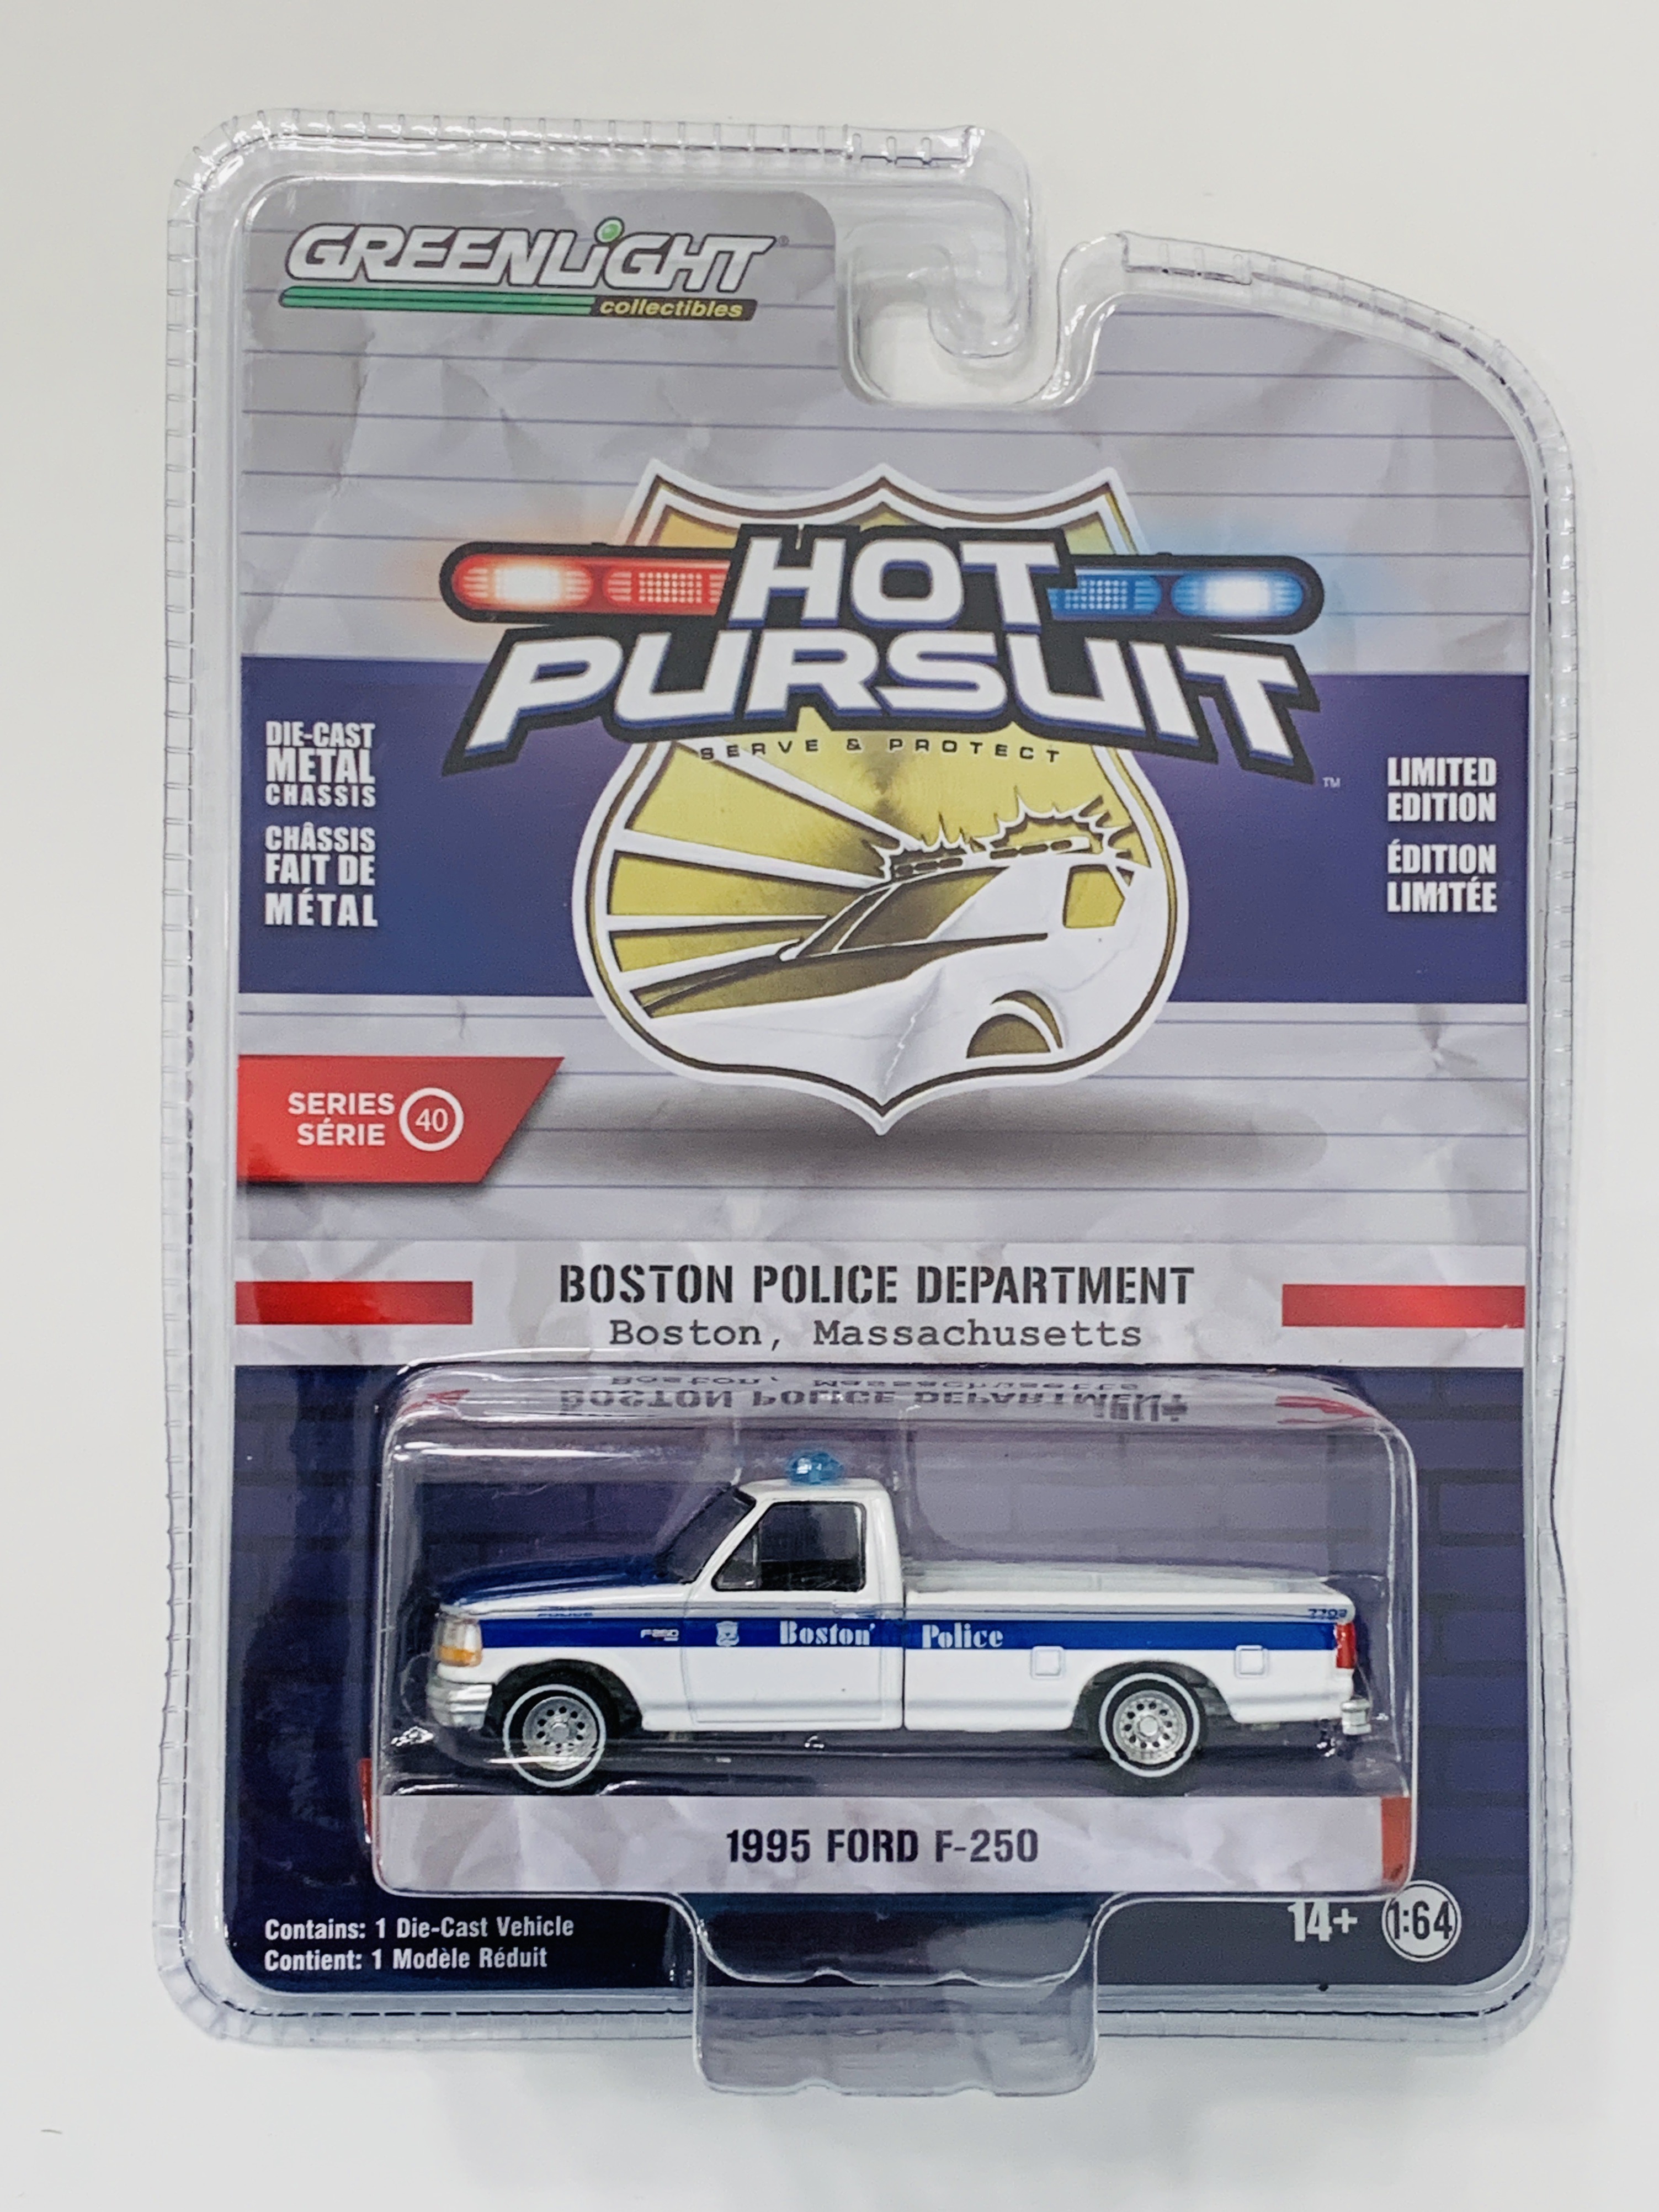 Greenlight Hot Pursuit Boston Police Department 1985 Ford F-250